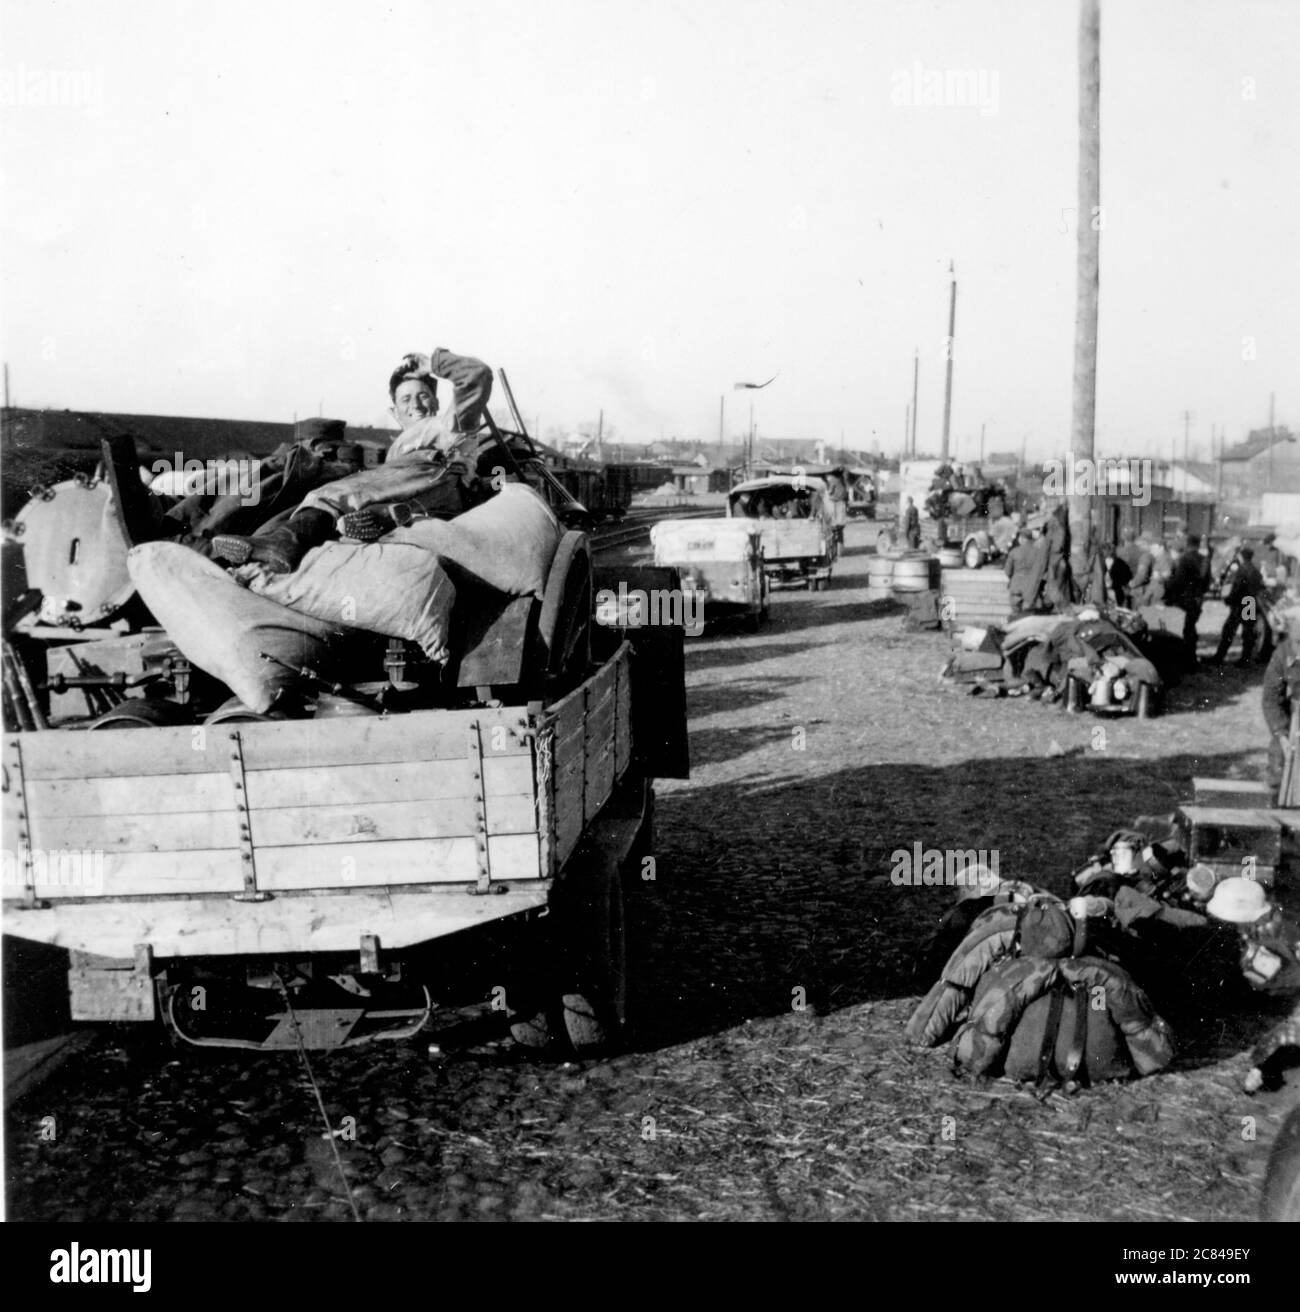 Oryol or Orel - Oryol Oblast, Russia, second world war - German Wehrmacht invade east front - barbarossa operation - military camp Stock Photo